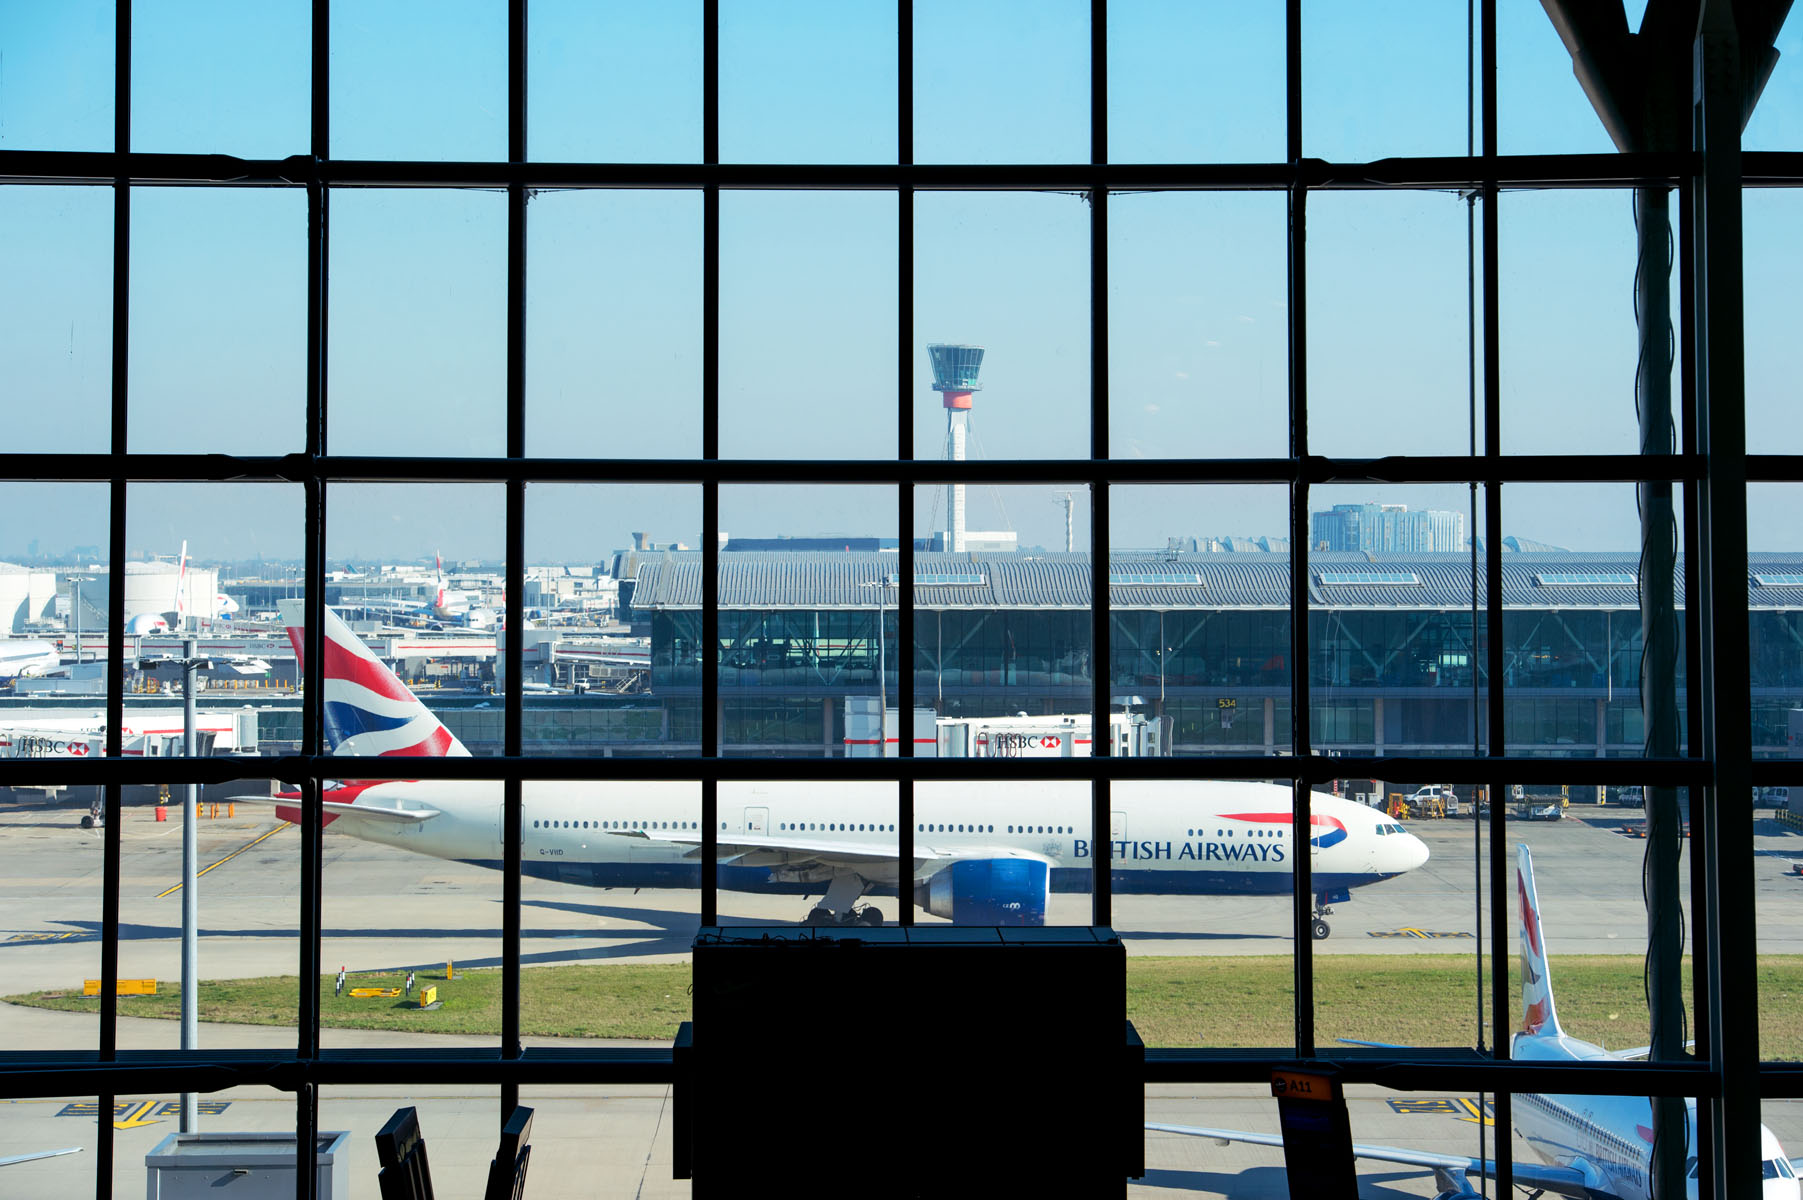 British Airways Parent Company Soars with Record £1.1Bn Profit